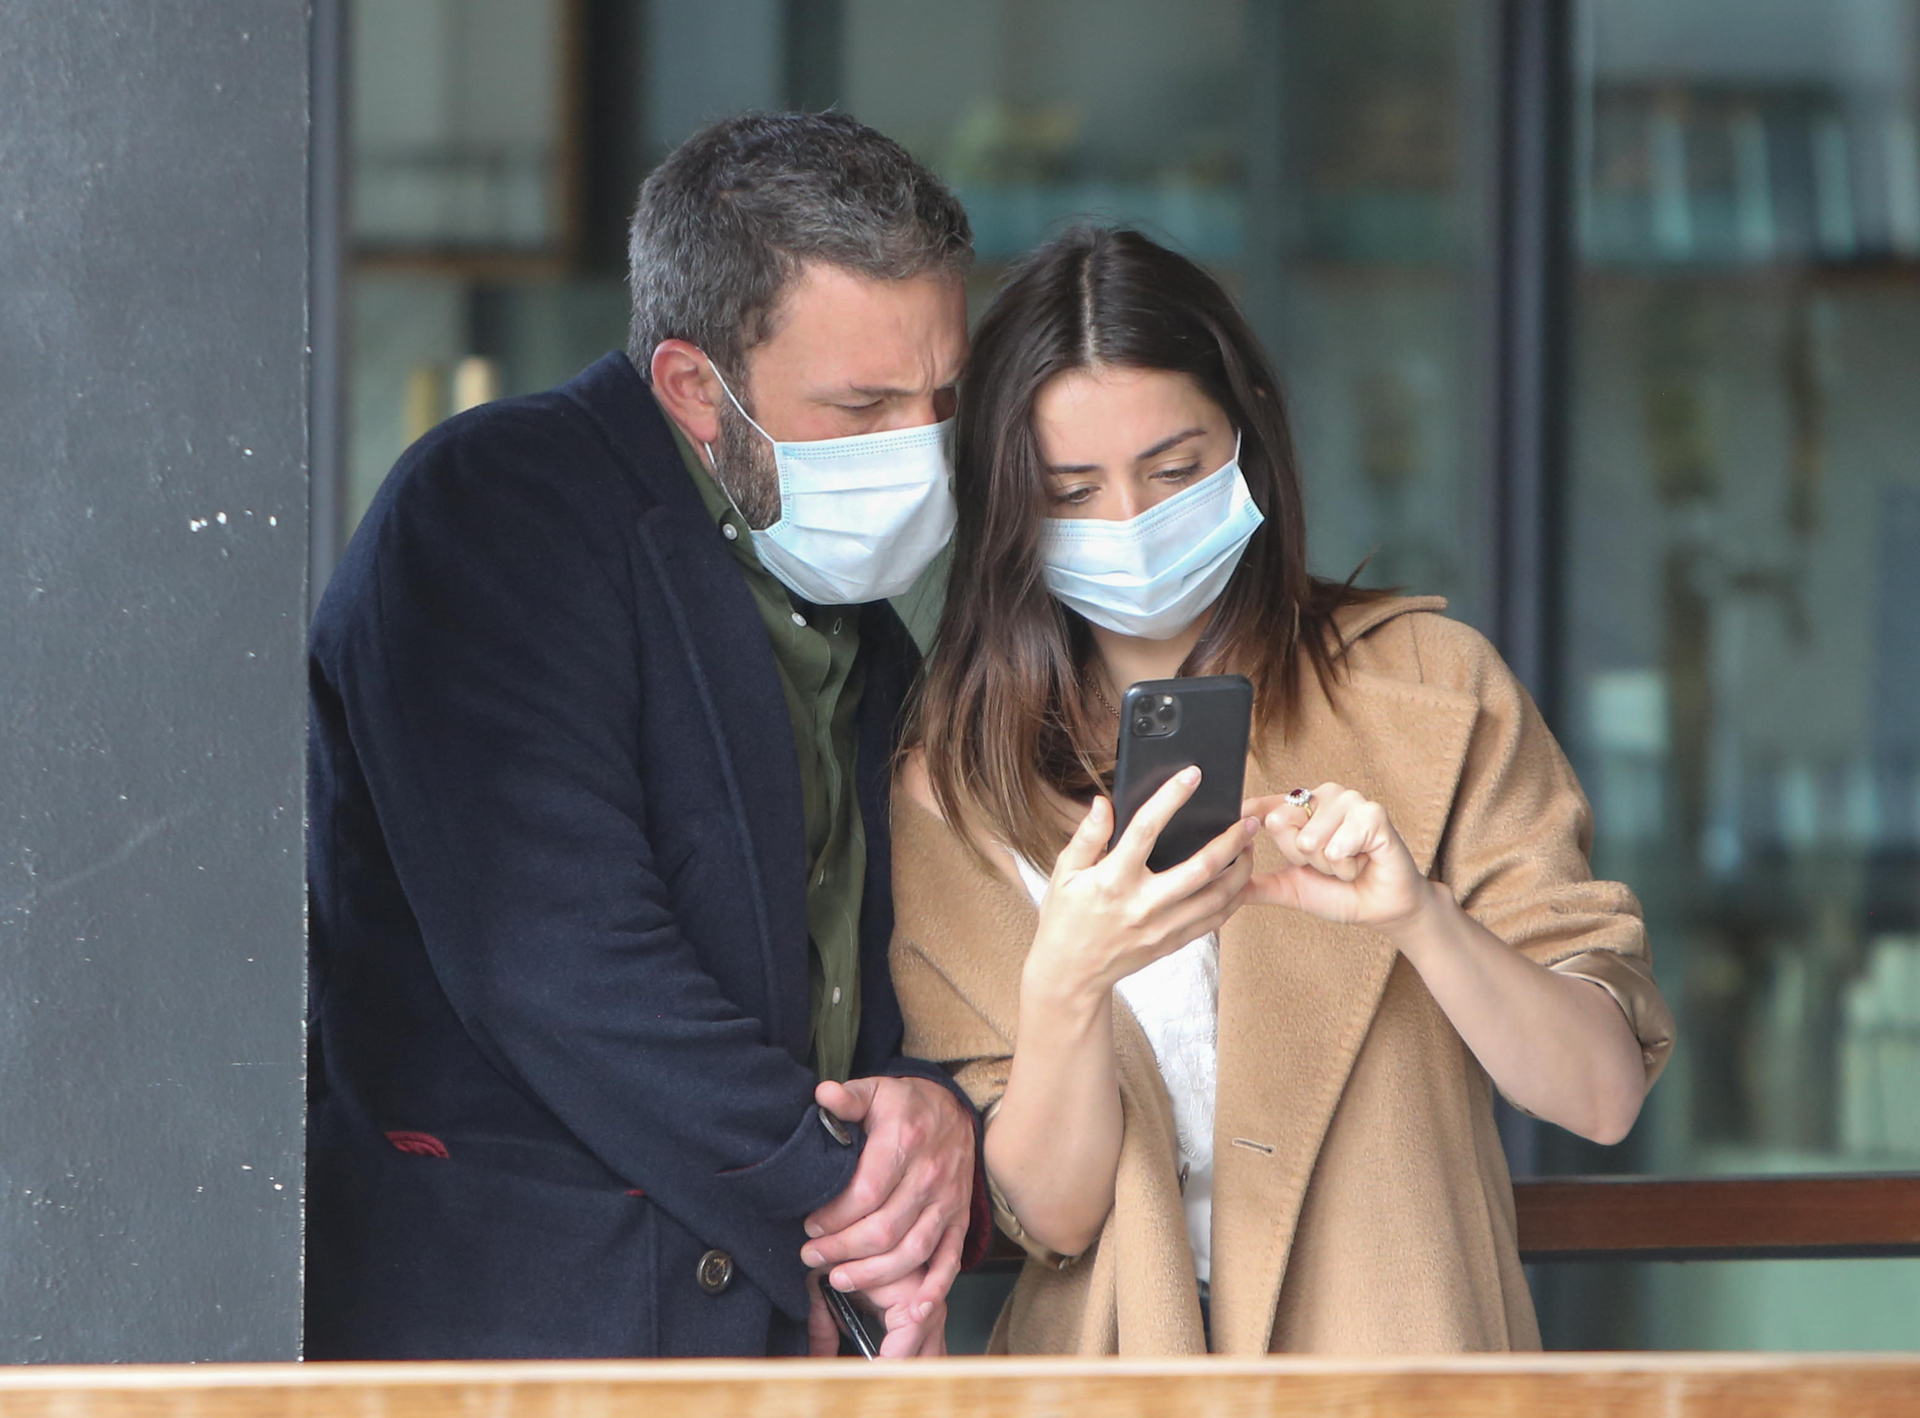 Ben Affleck and Ana de Armas are seen on April 18, 2020 in Los Angeles, California